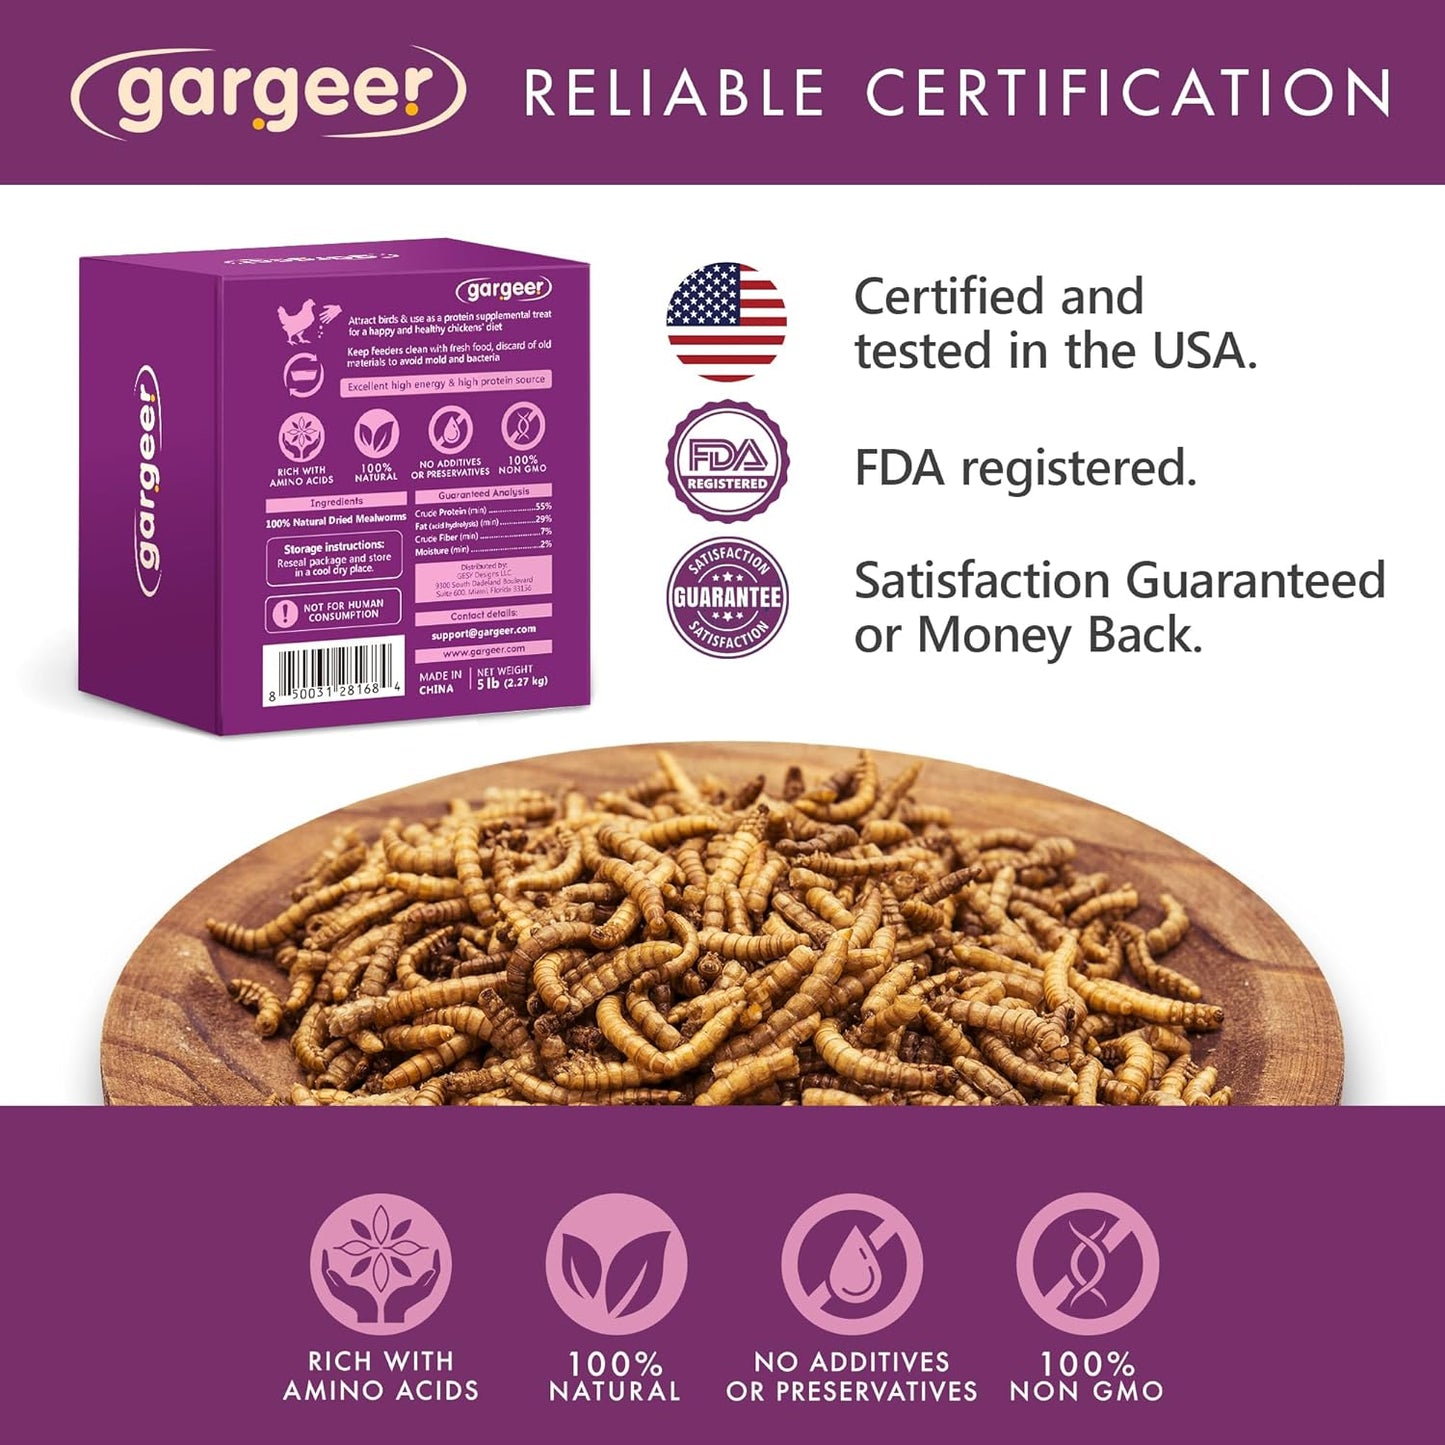 Gargeer Dried Mealworms, 5LB of High Appealing Protein Content, Low Waste, Year-Round Nutrient-Dense Food Source. No Artificial Additives or Processing, No Sugar, with Lower Risk of Choking. Enjoy!